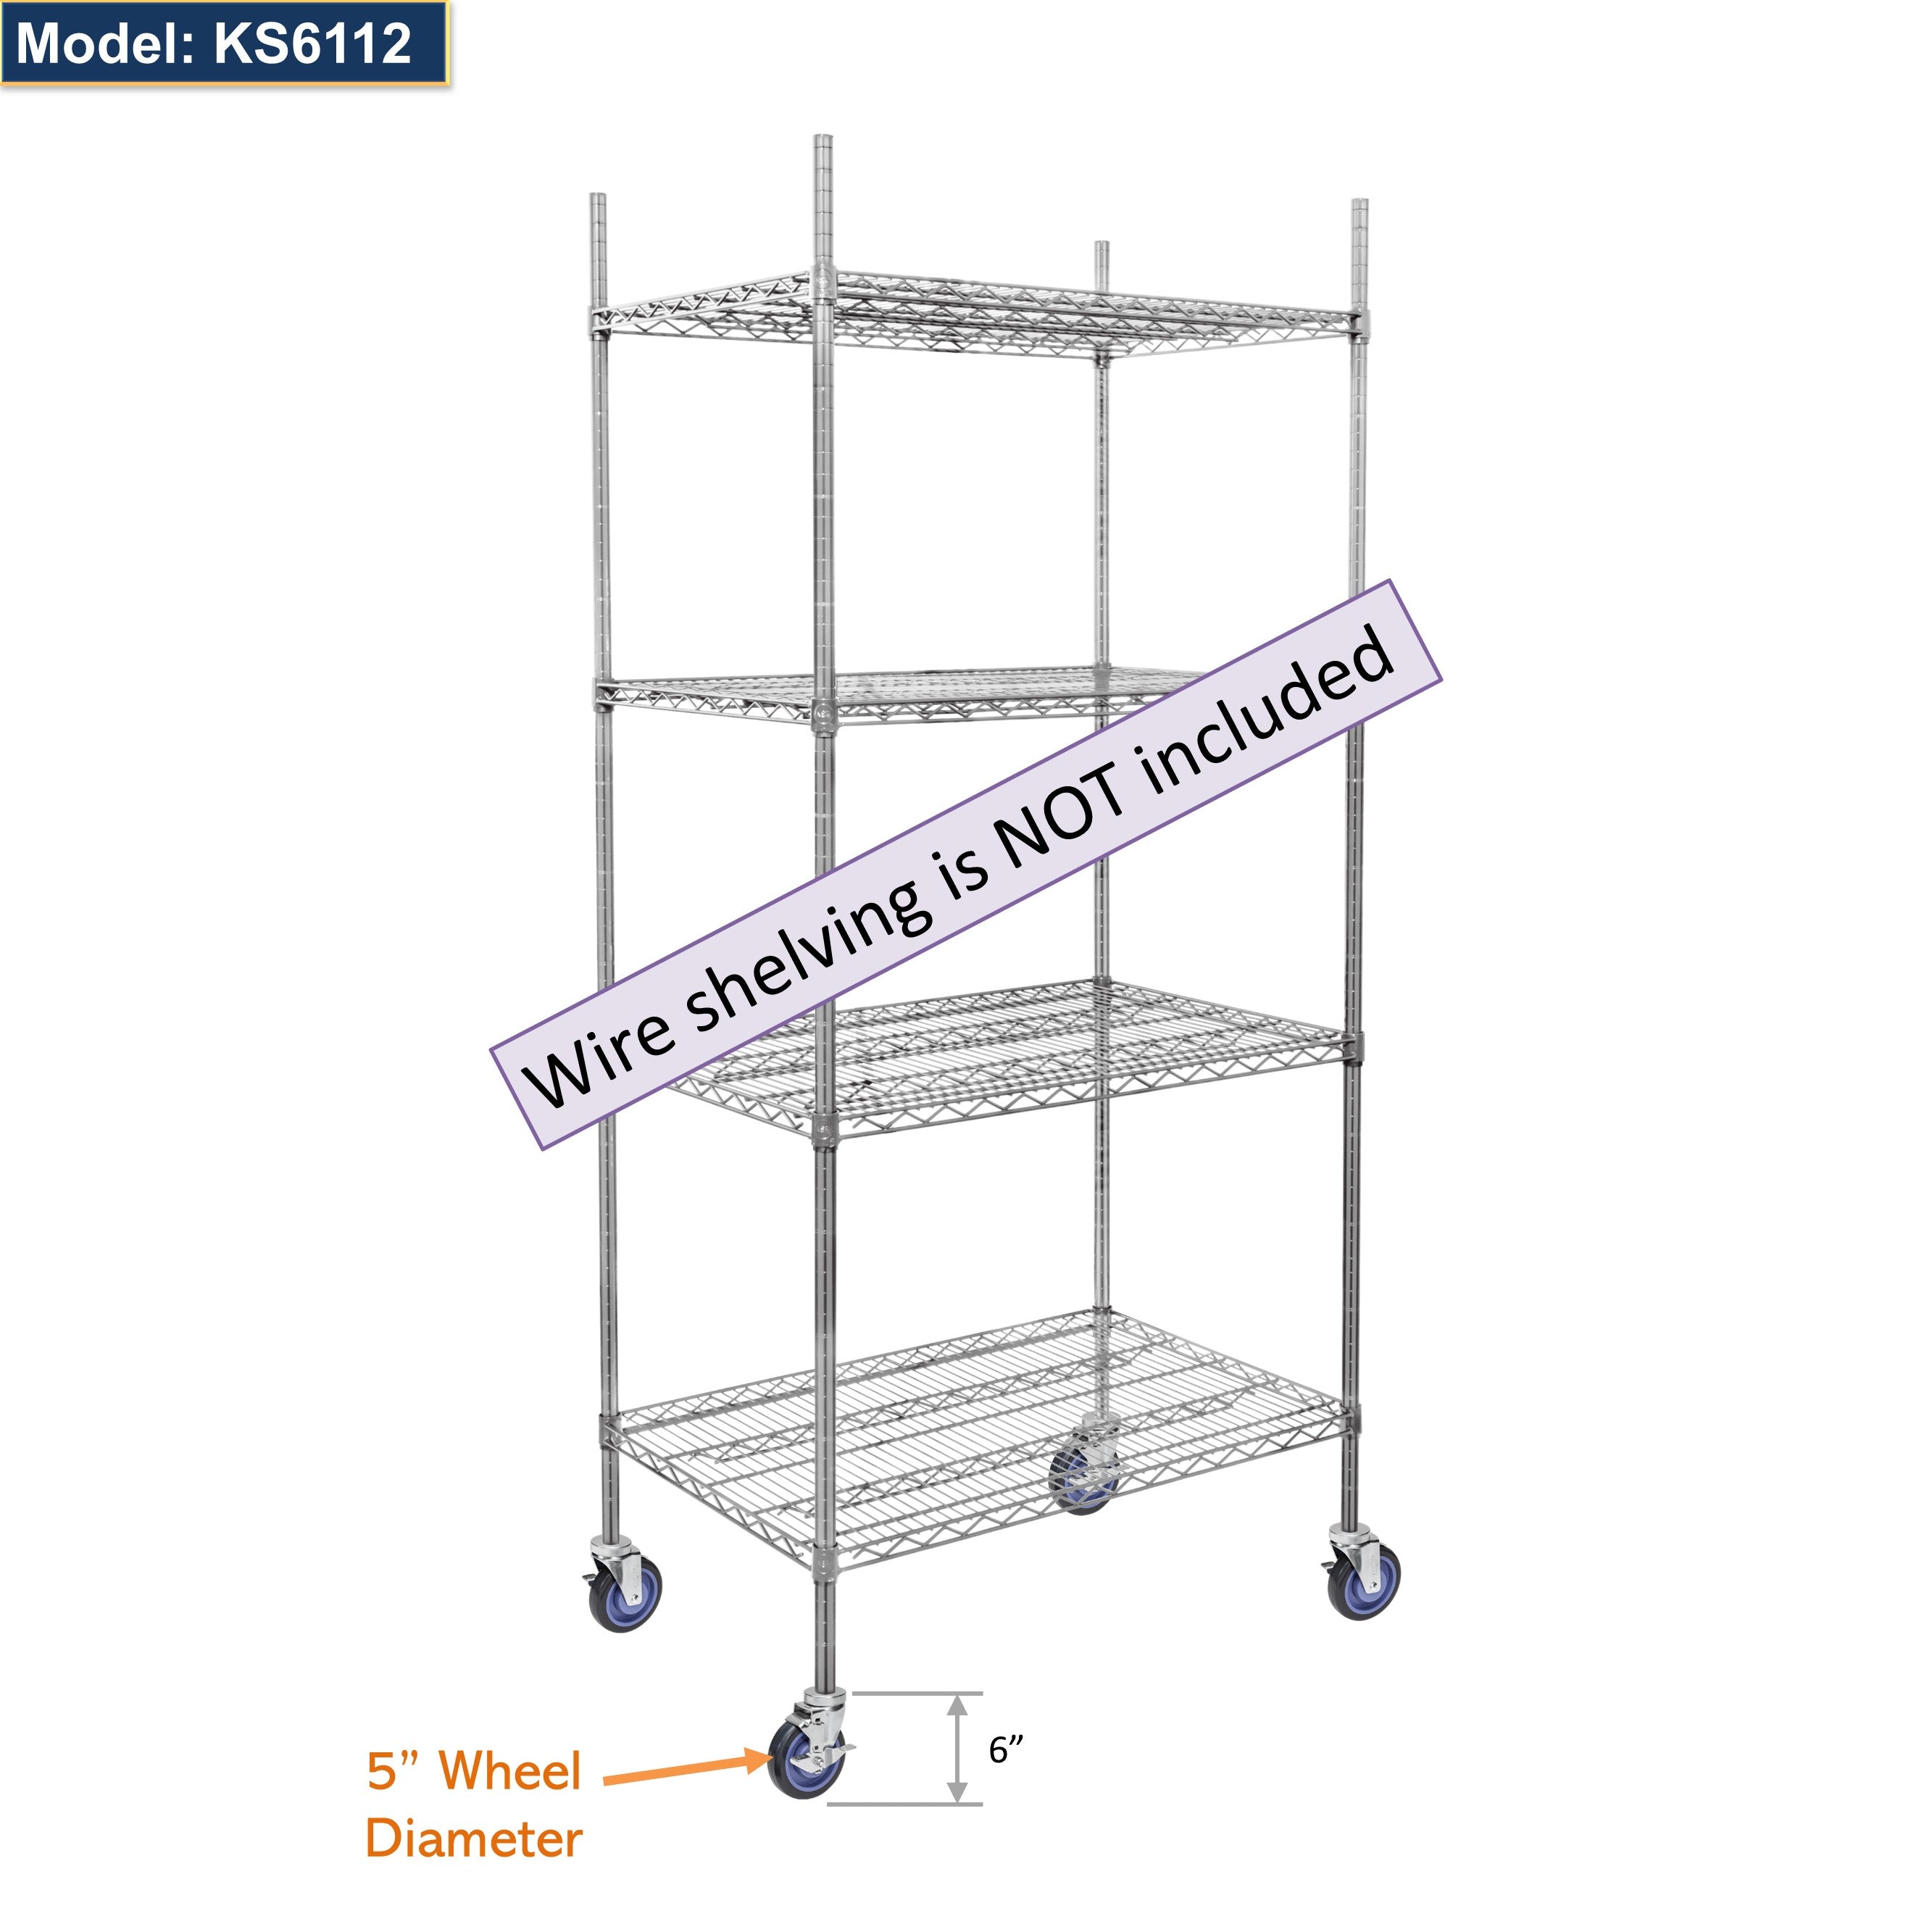 GSW 5" Heavy Duty Casters Wheels with Expanding Stem - Loading Capacity: 1480 lbs. Use for Wire Shelvings, Storage Racks, Residential, Warehouses (Swivel with Brake)